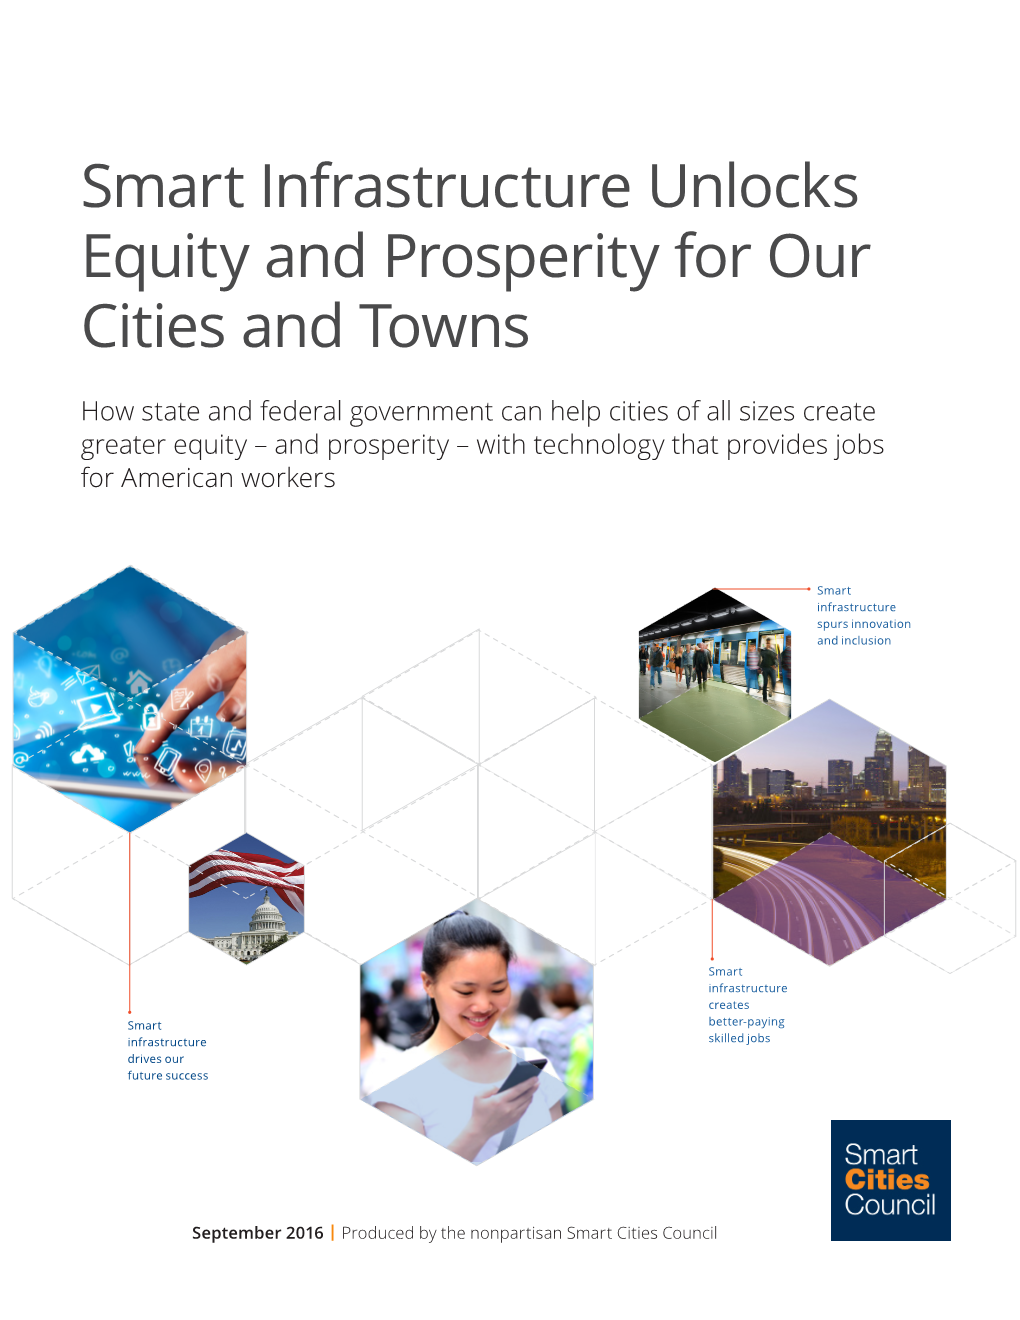 Smart Infrastructure Unlocks Equity and Prosperity for Our Cities and Towns